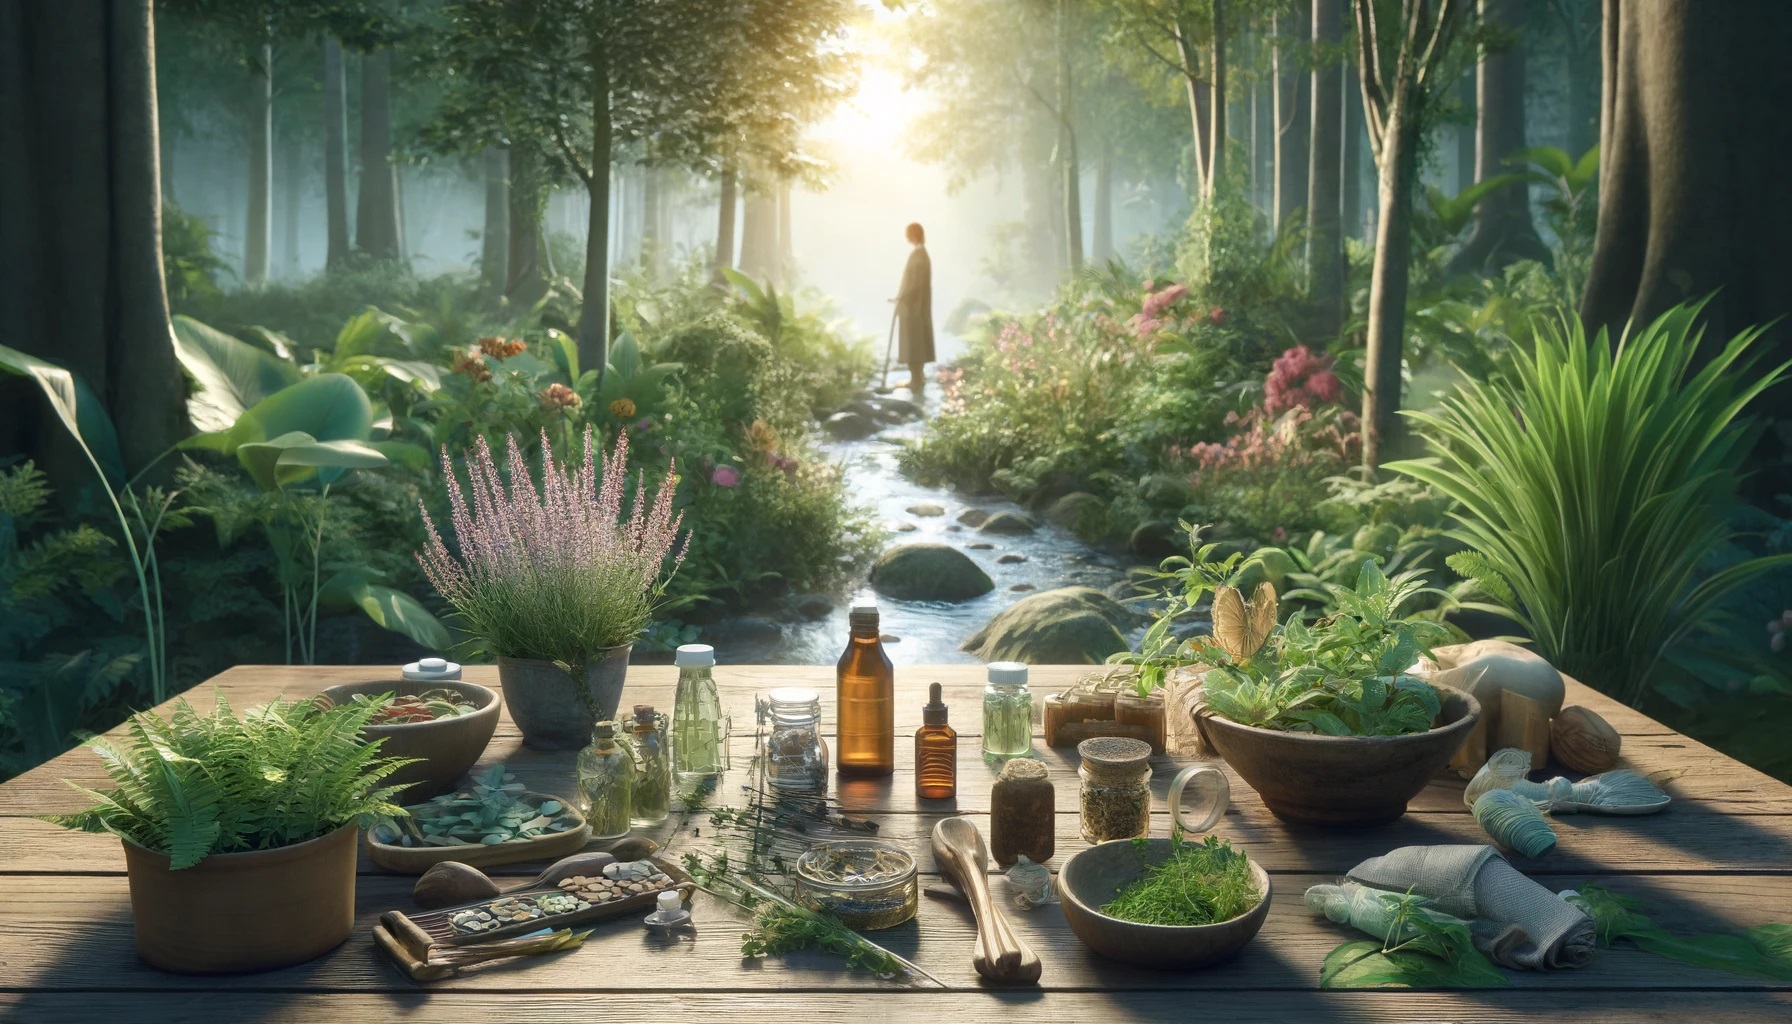 Are There Alternatives to Medication? Exploring Natural and Herbal Remedies